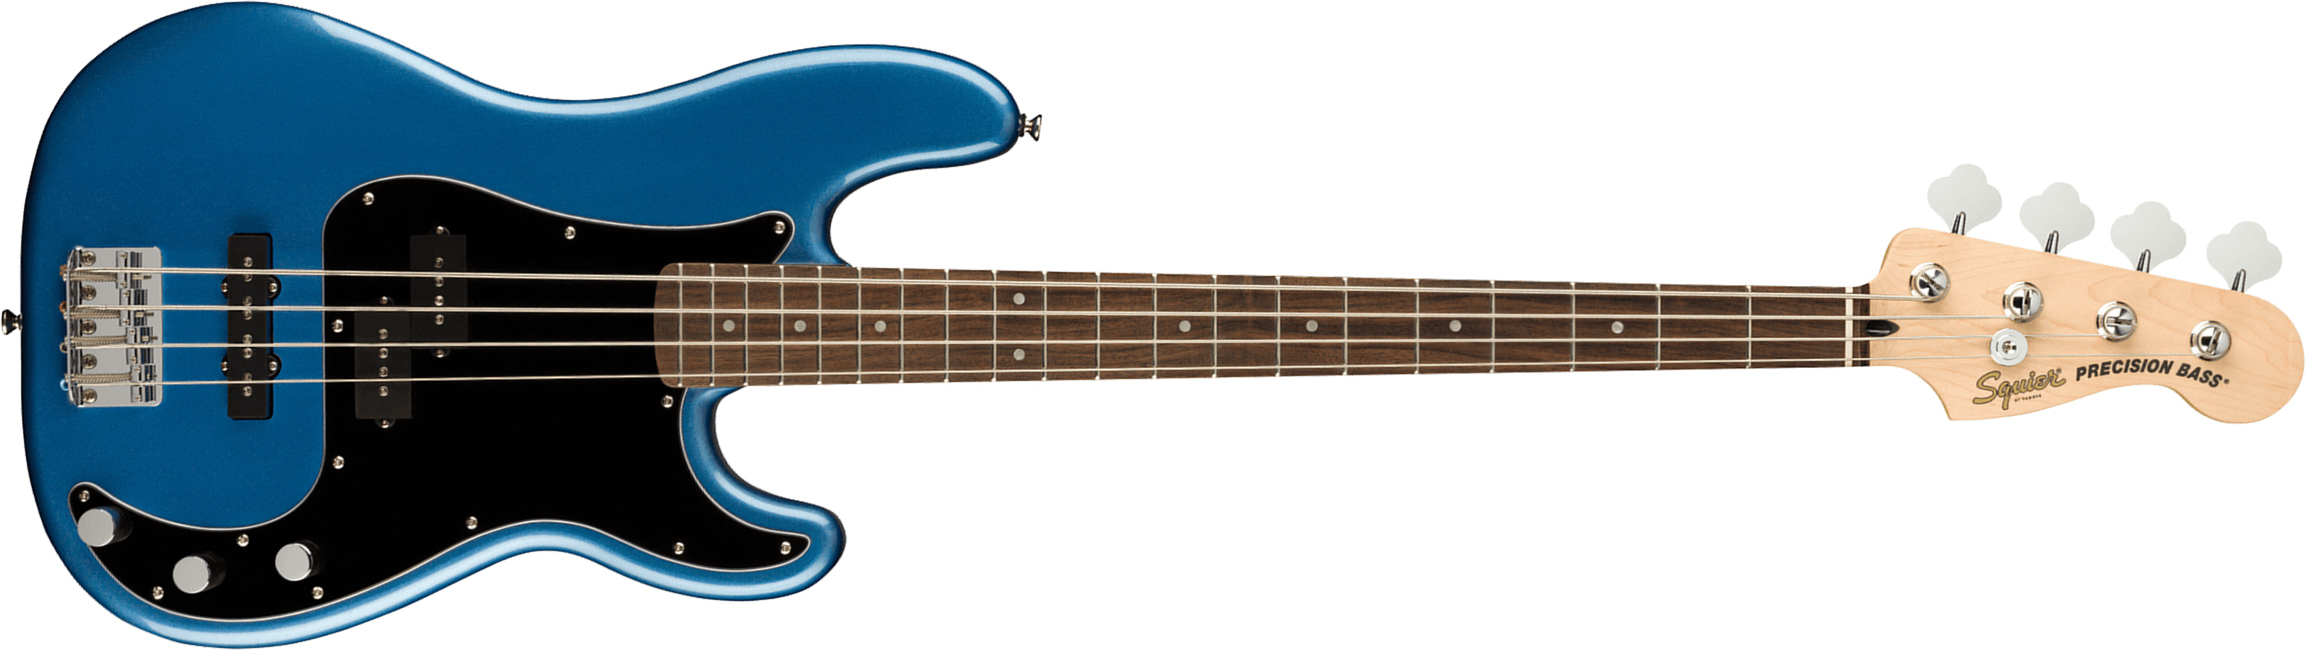 Squier Precision Bass Affinity Pj 2021 Lau - Lake Placid Blue - Solid body electric bass - Main picture